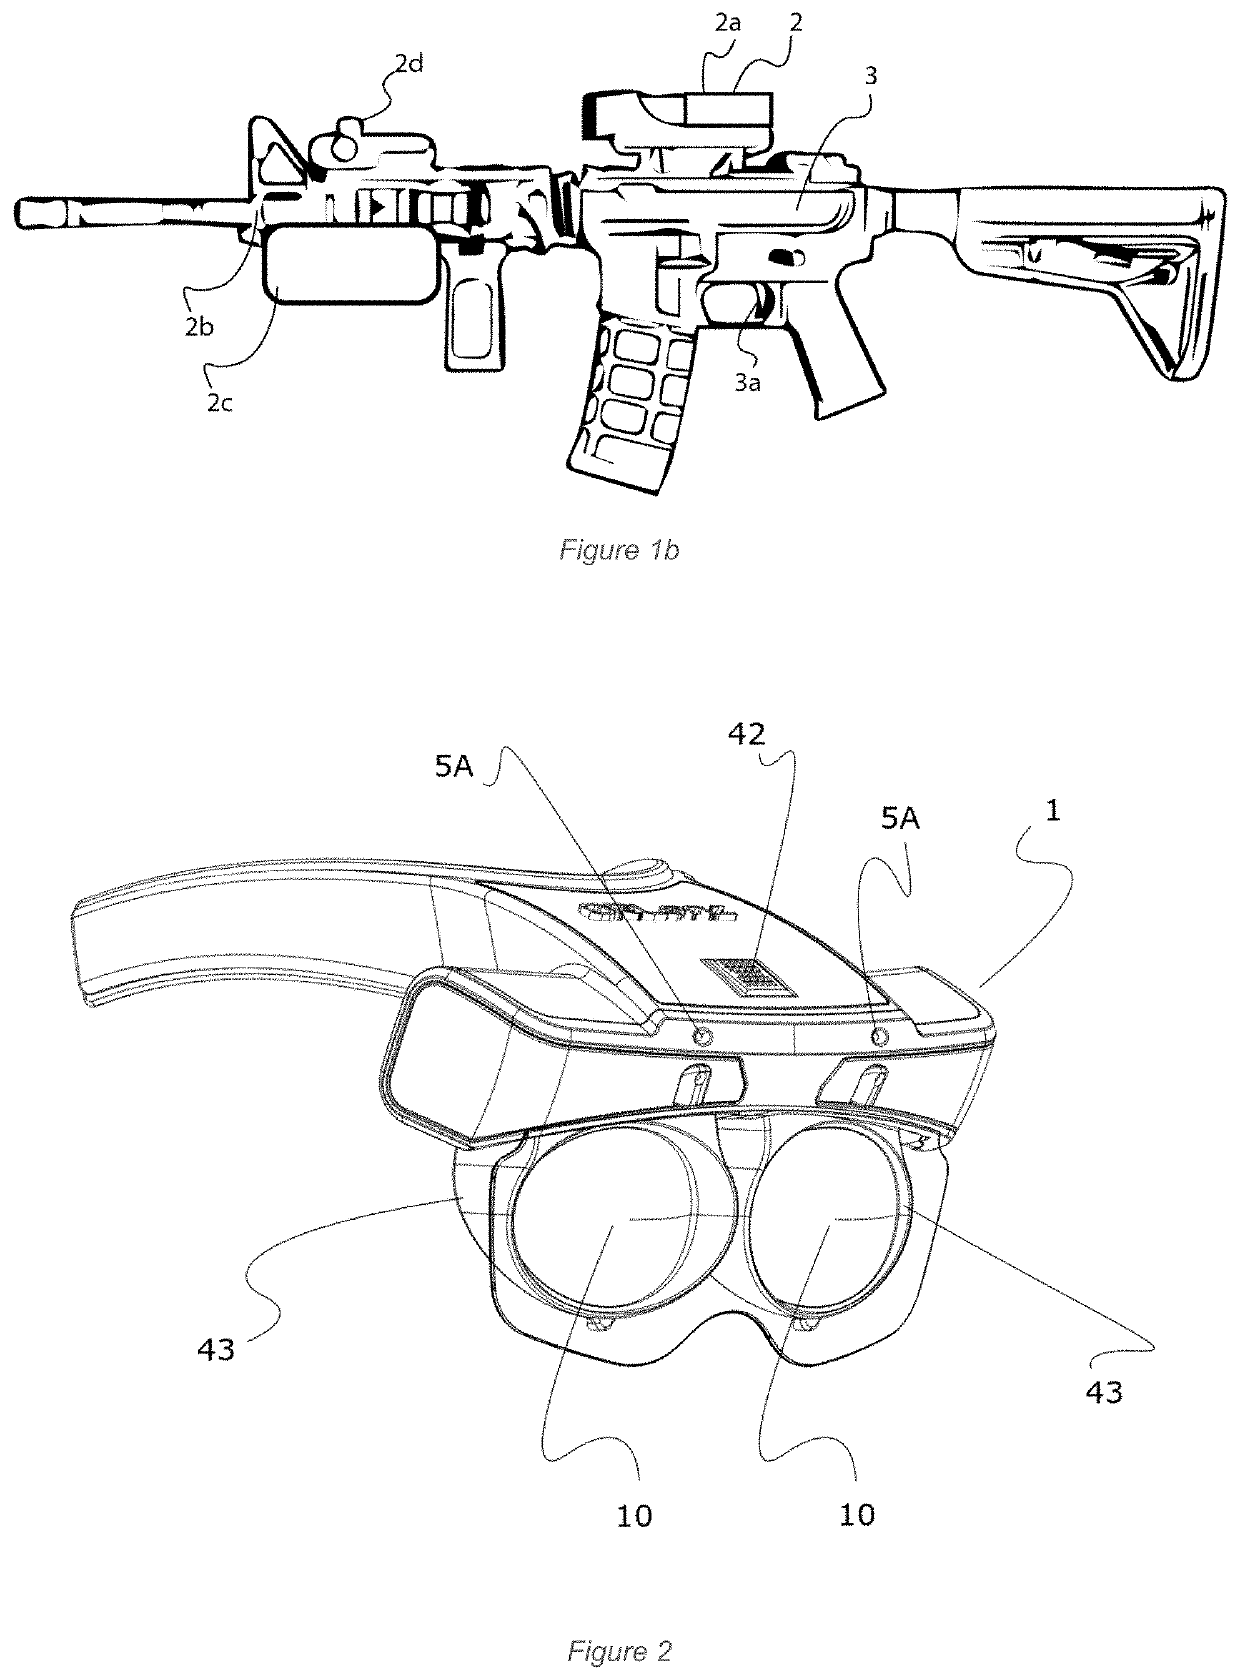 Ar/xr headset for military medical telemedicine and target acquisition